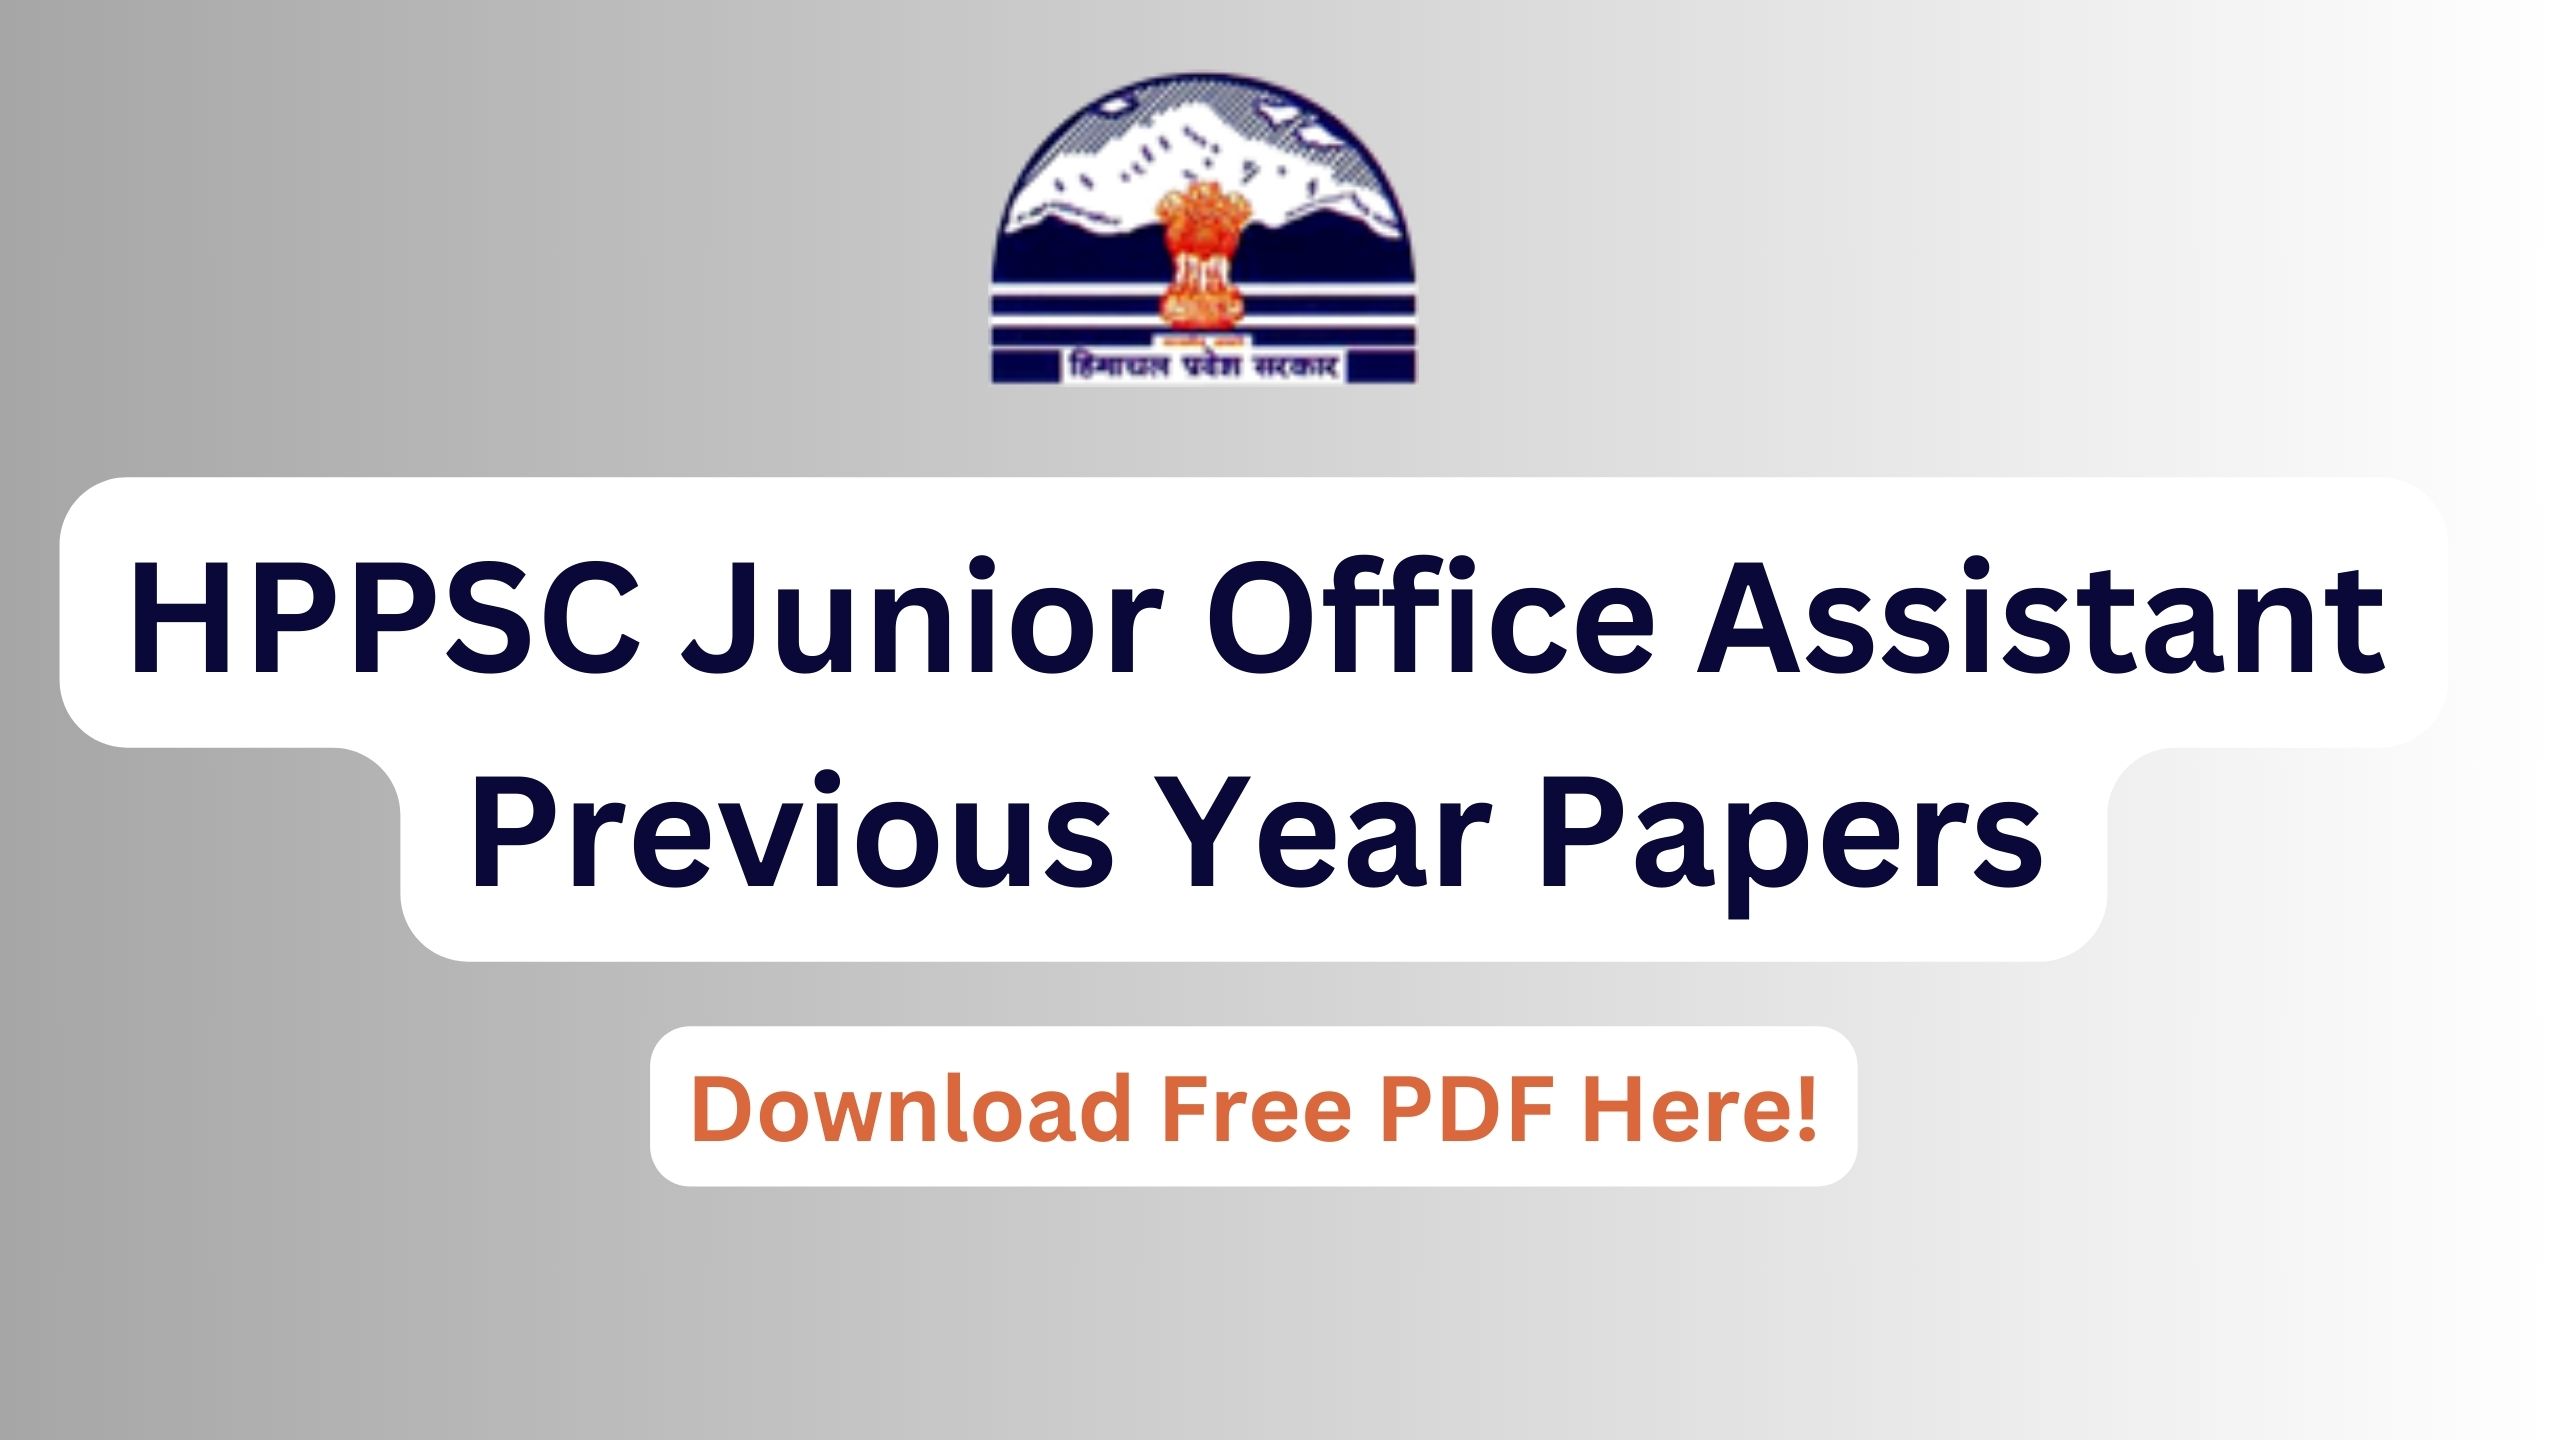 HPPSC Junior Office Assistant Previous Year Papers